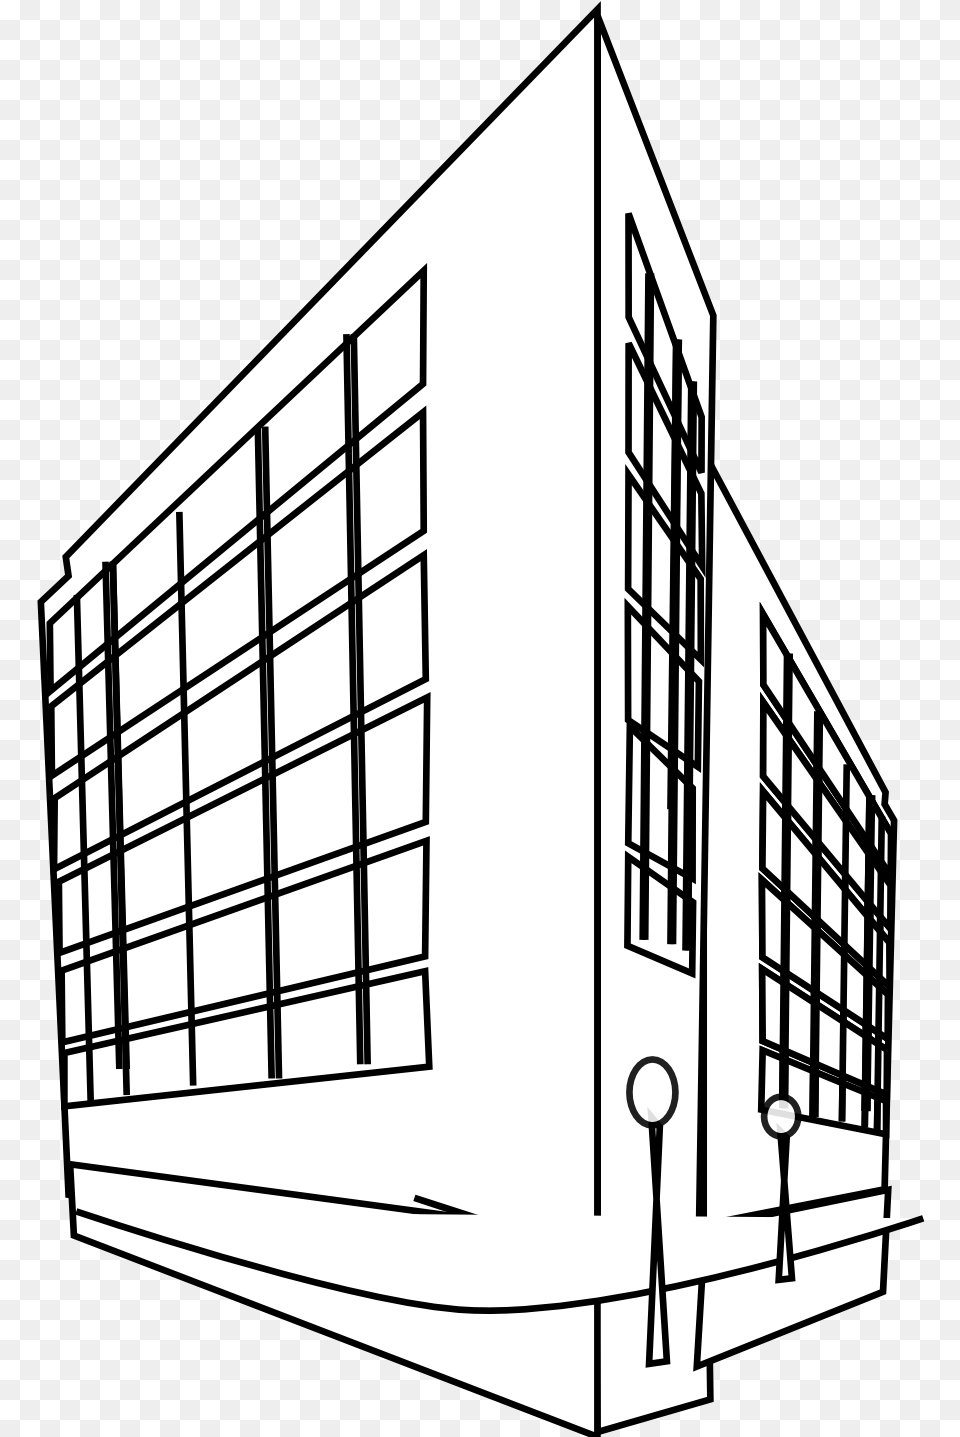 Building Black White Draw A Office Building, Architecture, Office Building, Art, Condo Png